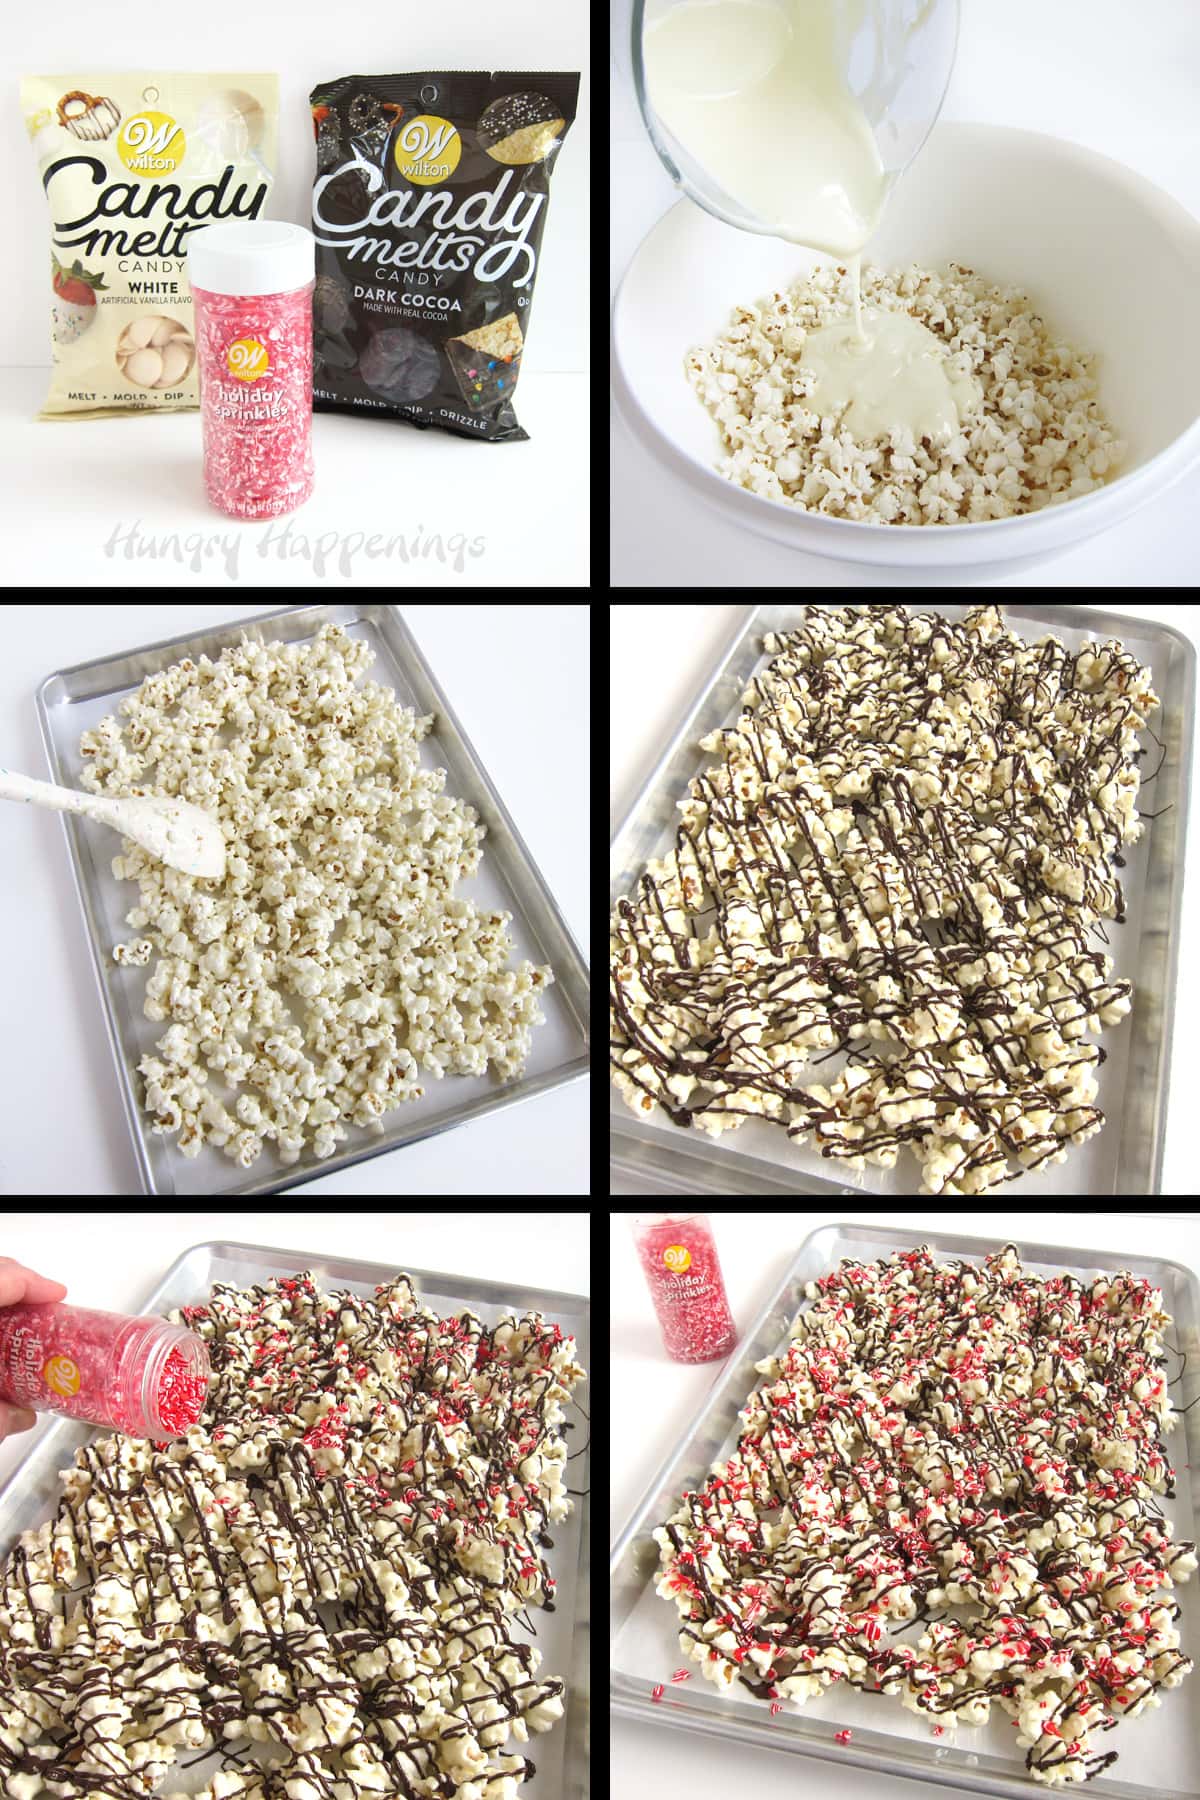 Toss popcorn with white chocolate then drizzle with dark chocolate and sprinkle on peppermint candies.